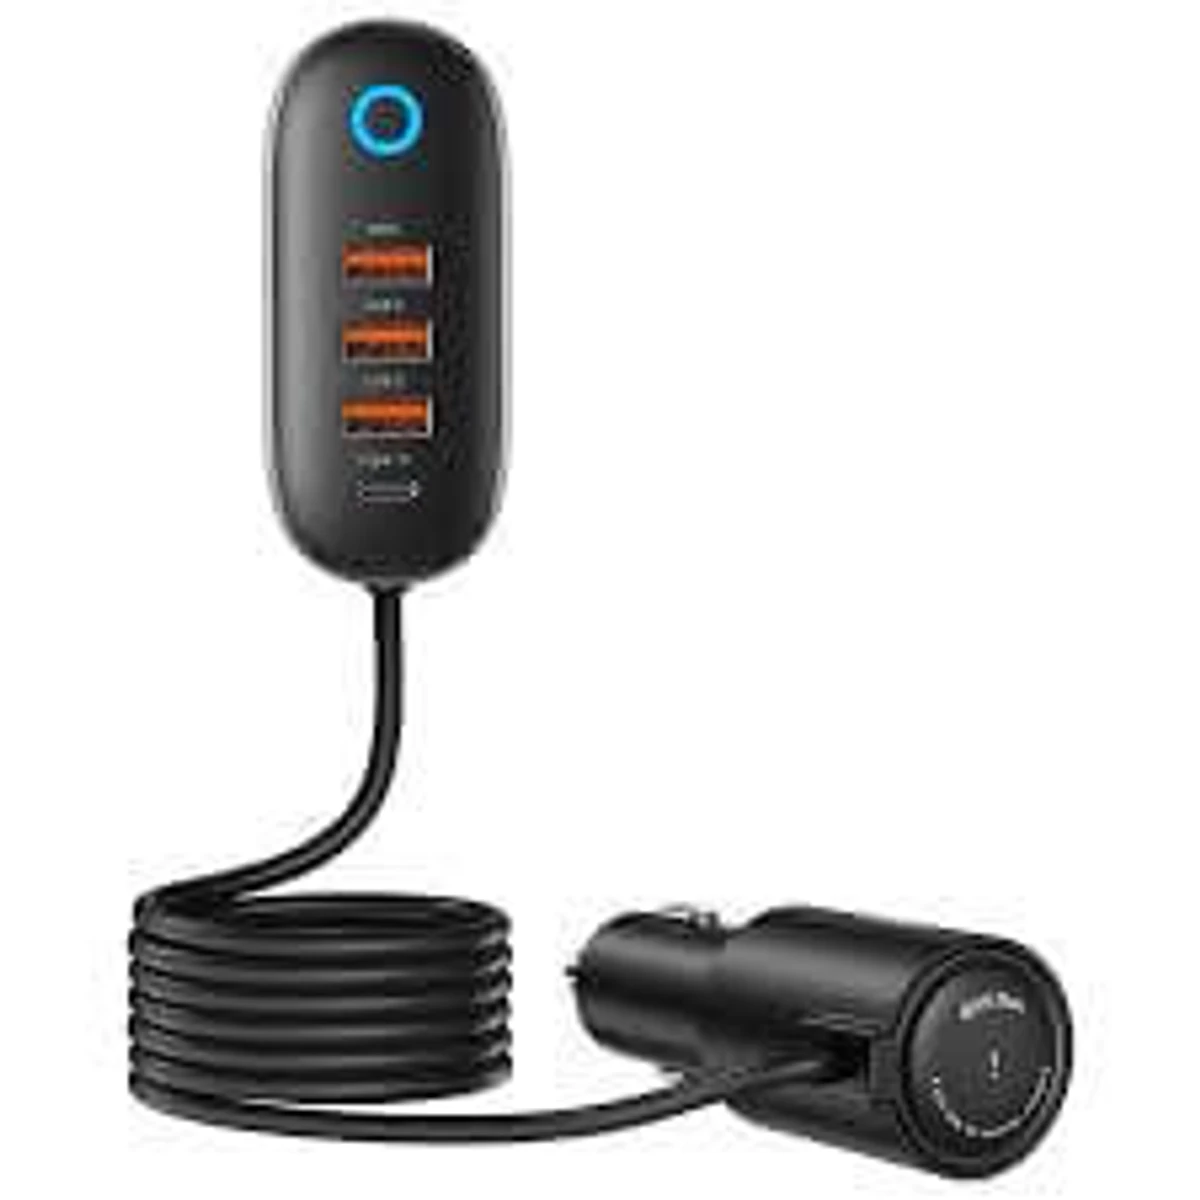 USAMS US-CC161 156W 4 USB Ports Extension Fast Car Charger with Cigarette Lighter